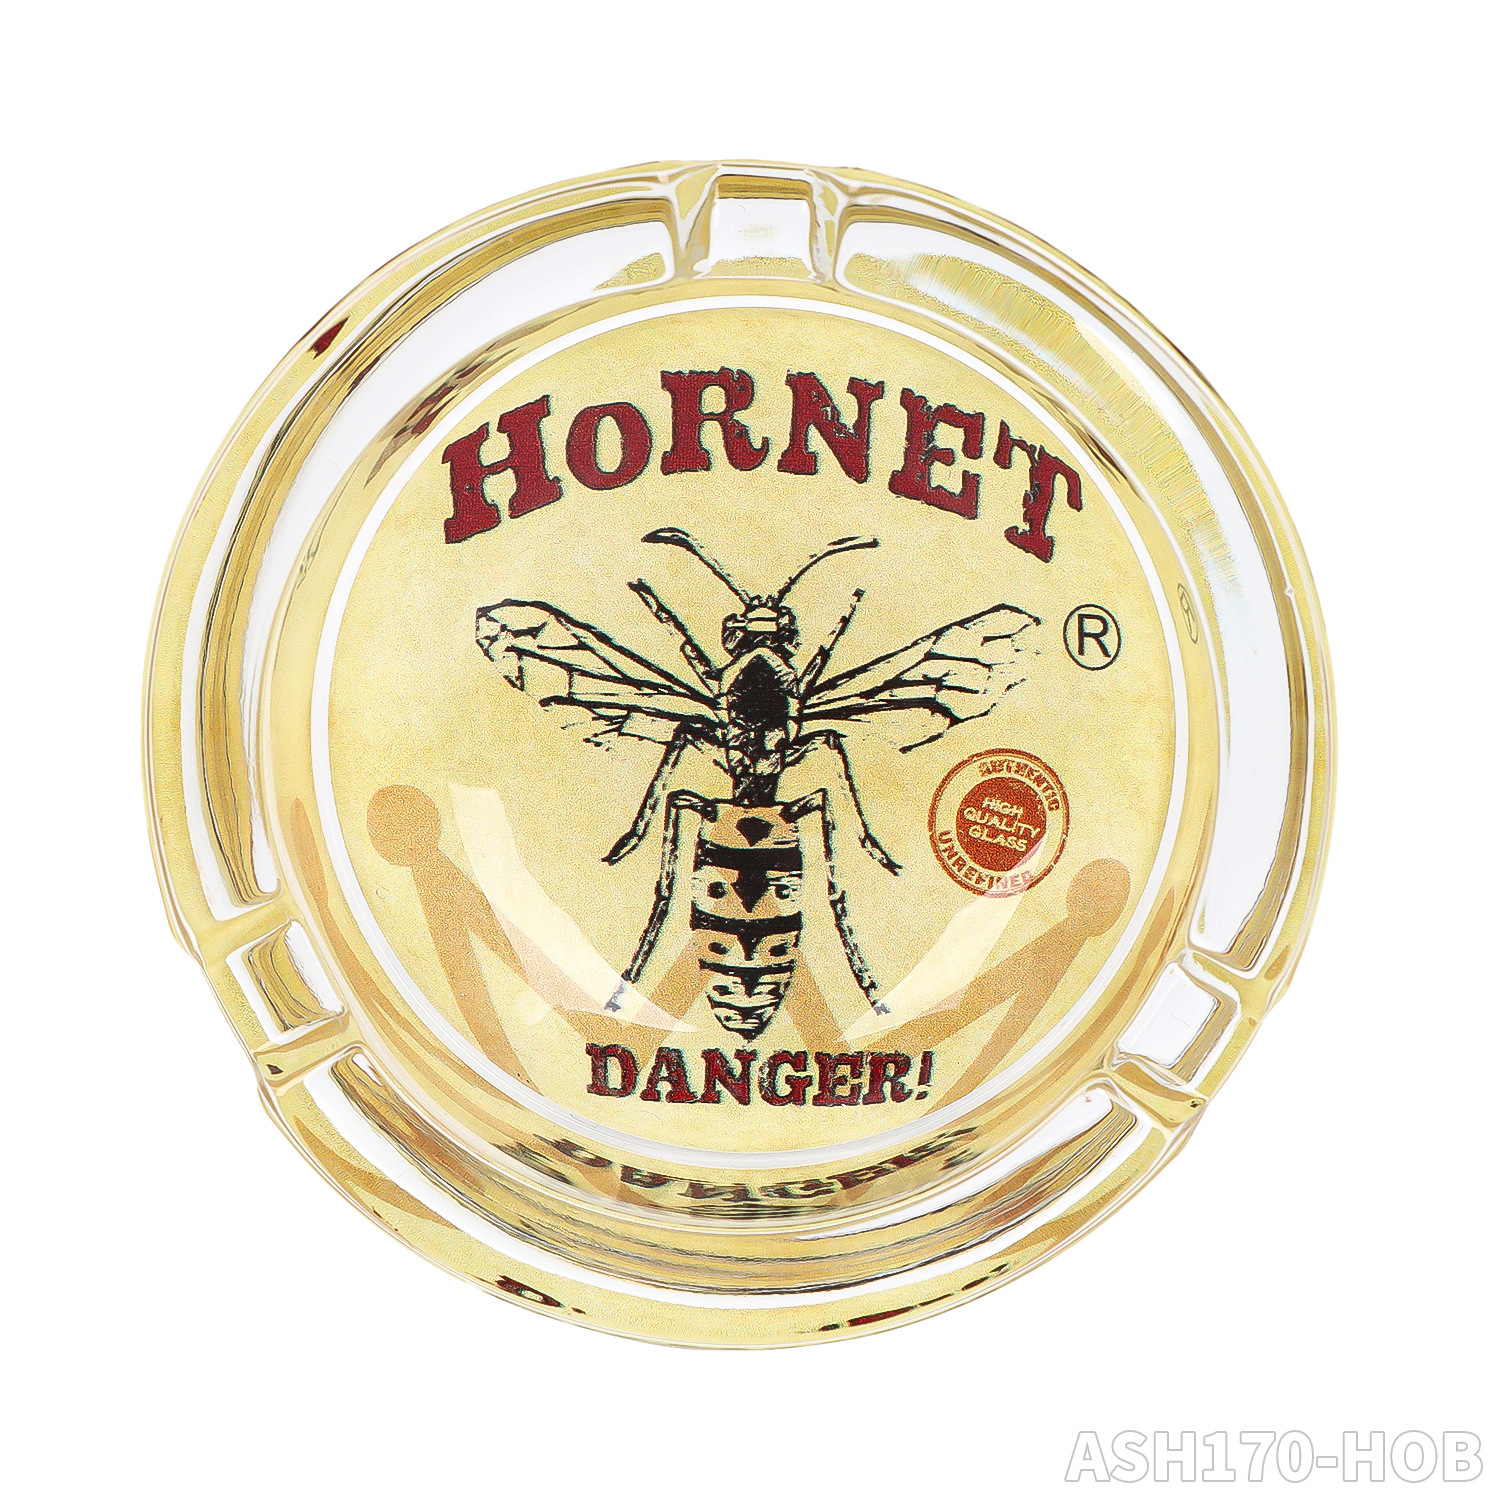 HORNET Glass Ashtray Smoking Accessories Clear Colorful Ashtrays Cartoon Round Square Ash Tray for Tobacco Cigarette Home Herb Decoration New